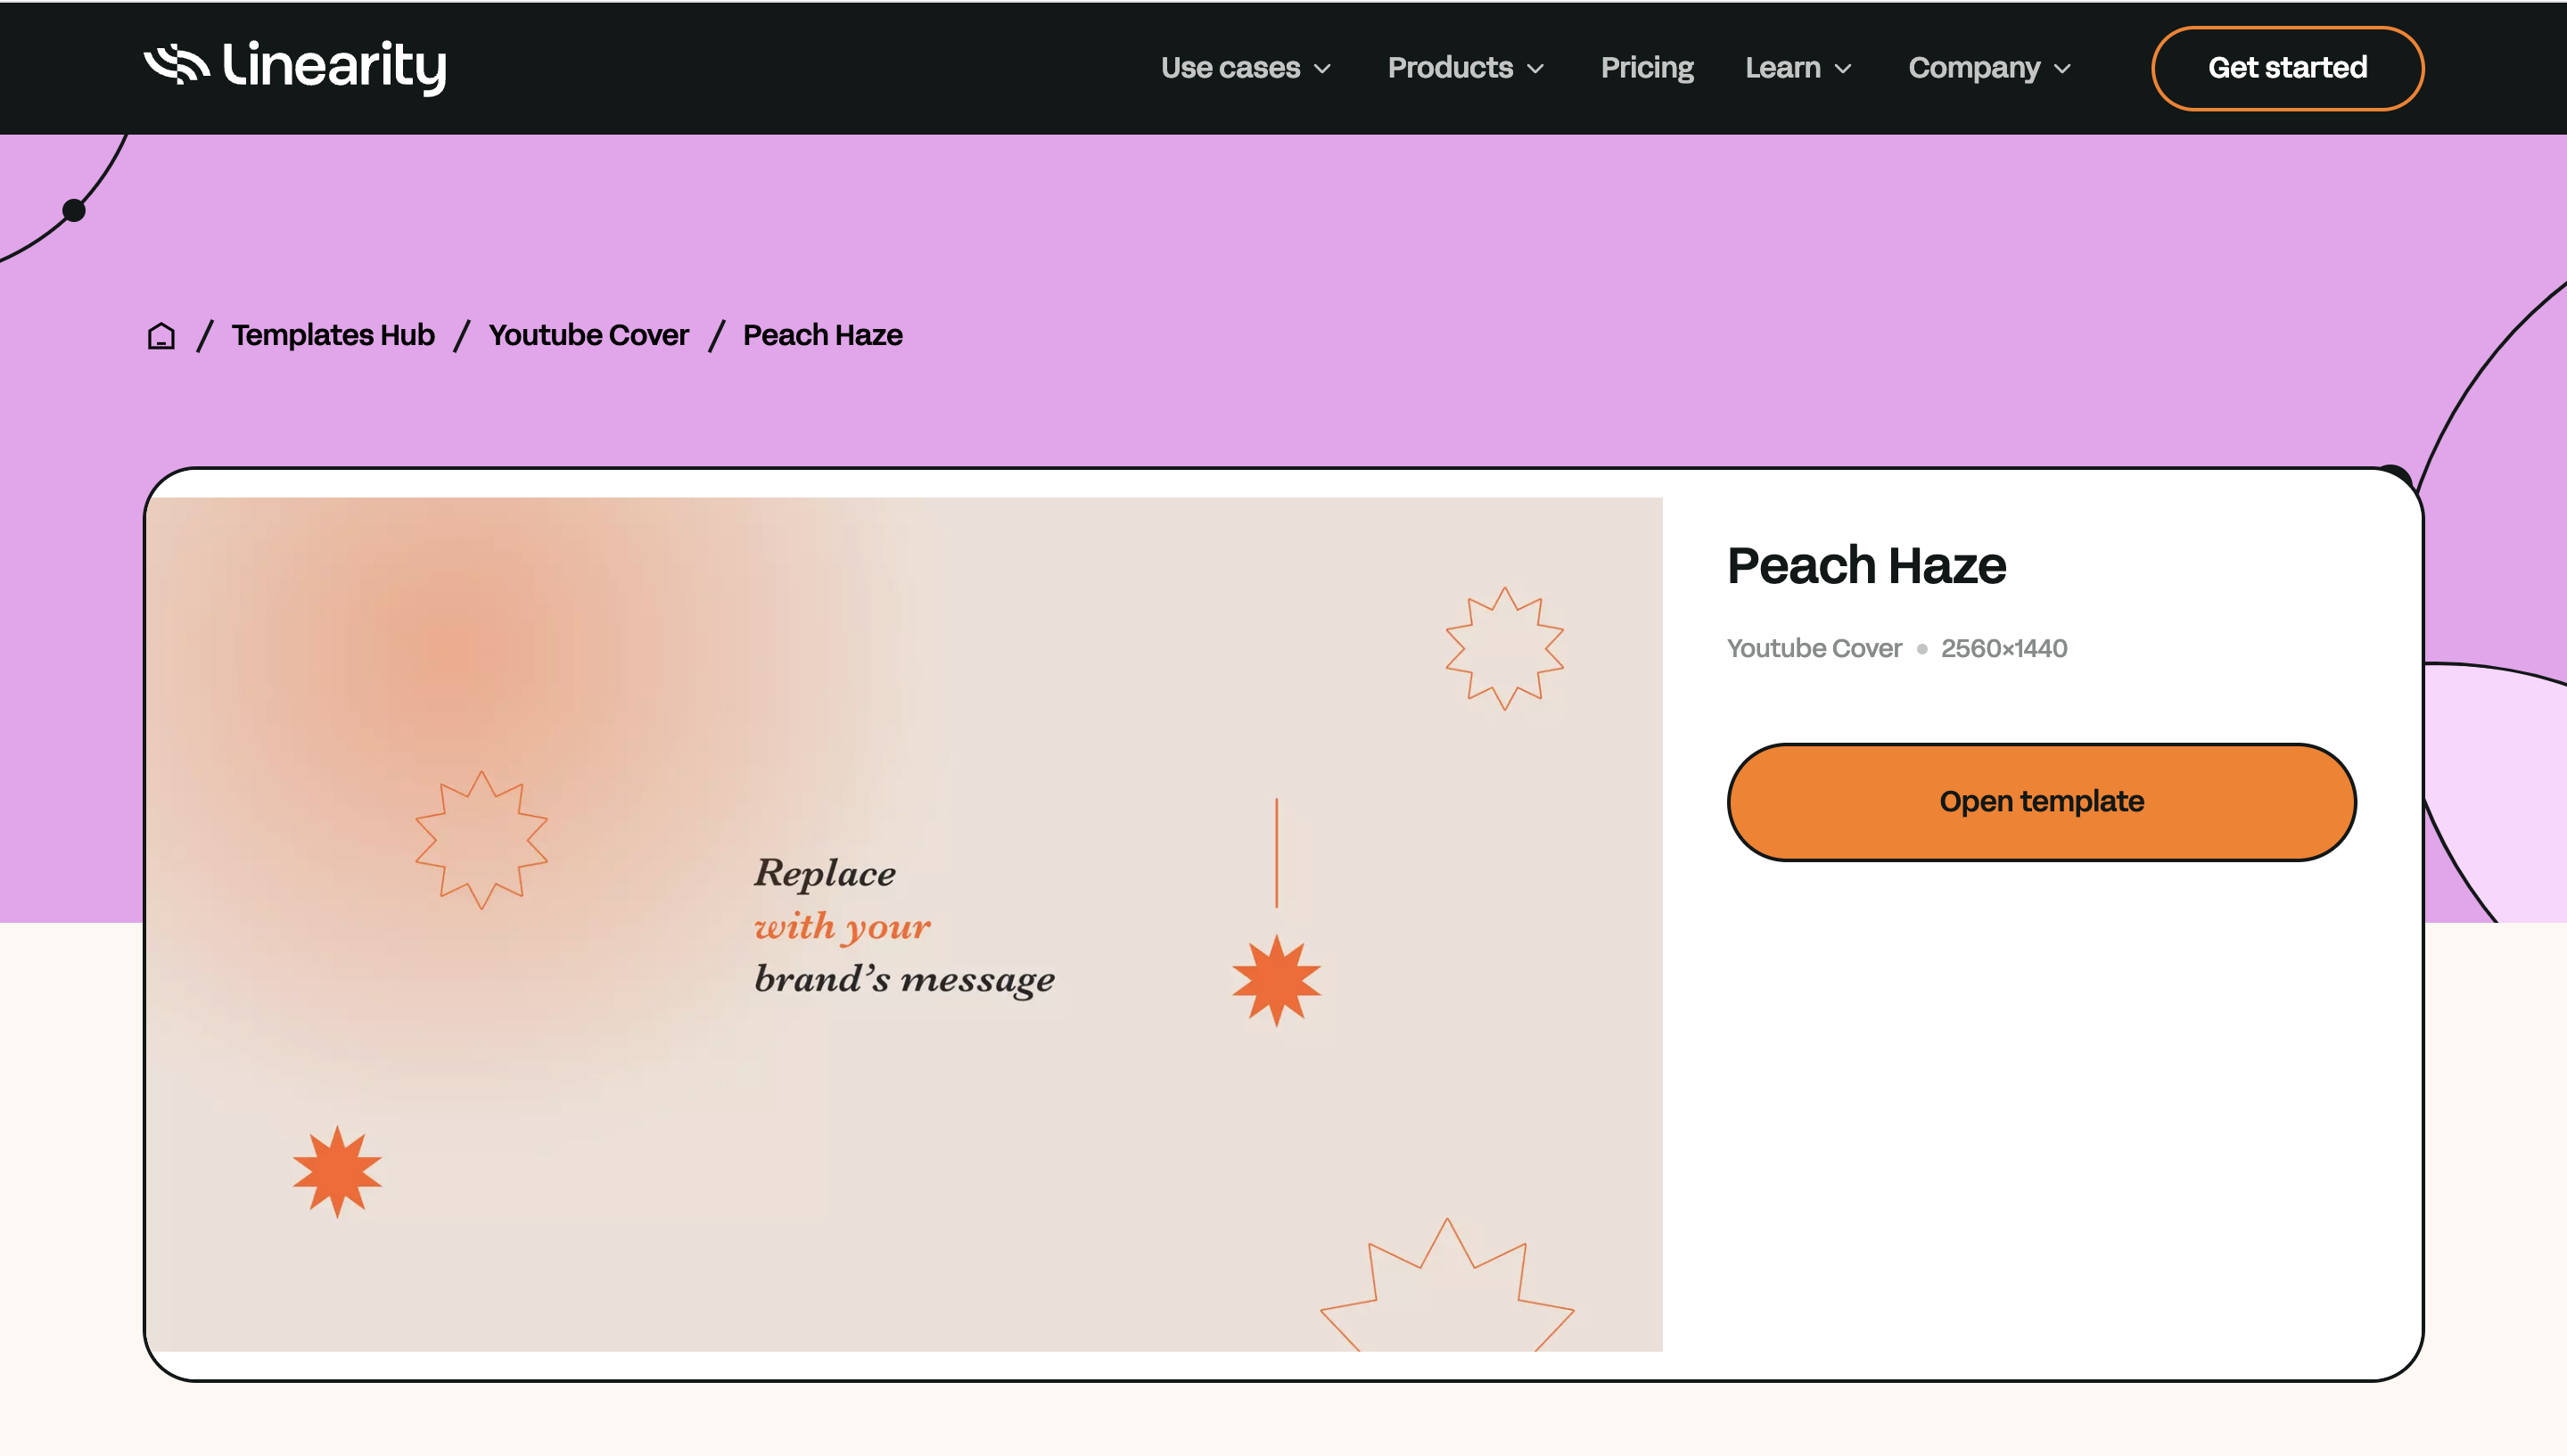 Template preview for 'Peach Haze' YouTube cover on Linearity website